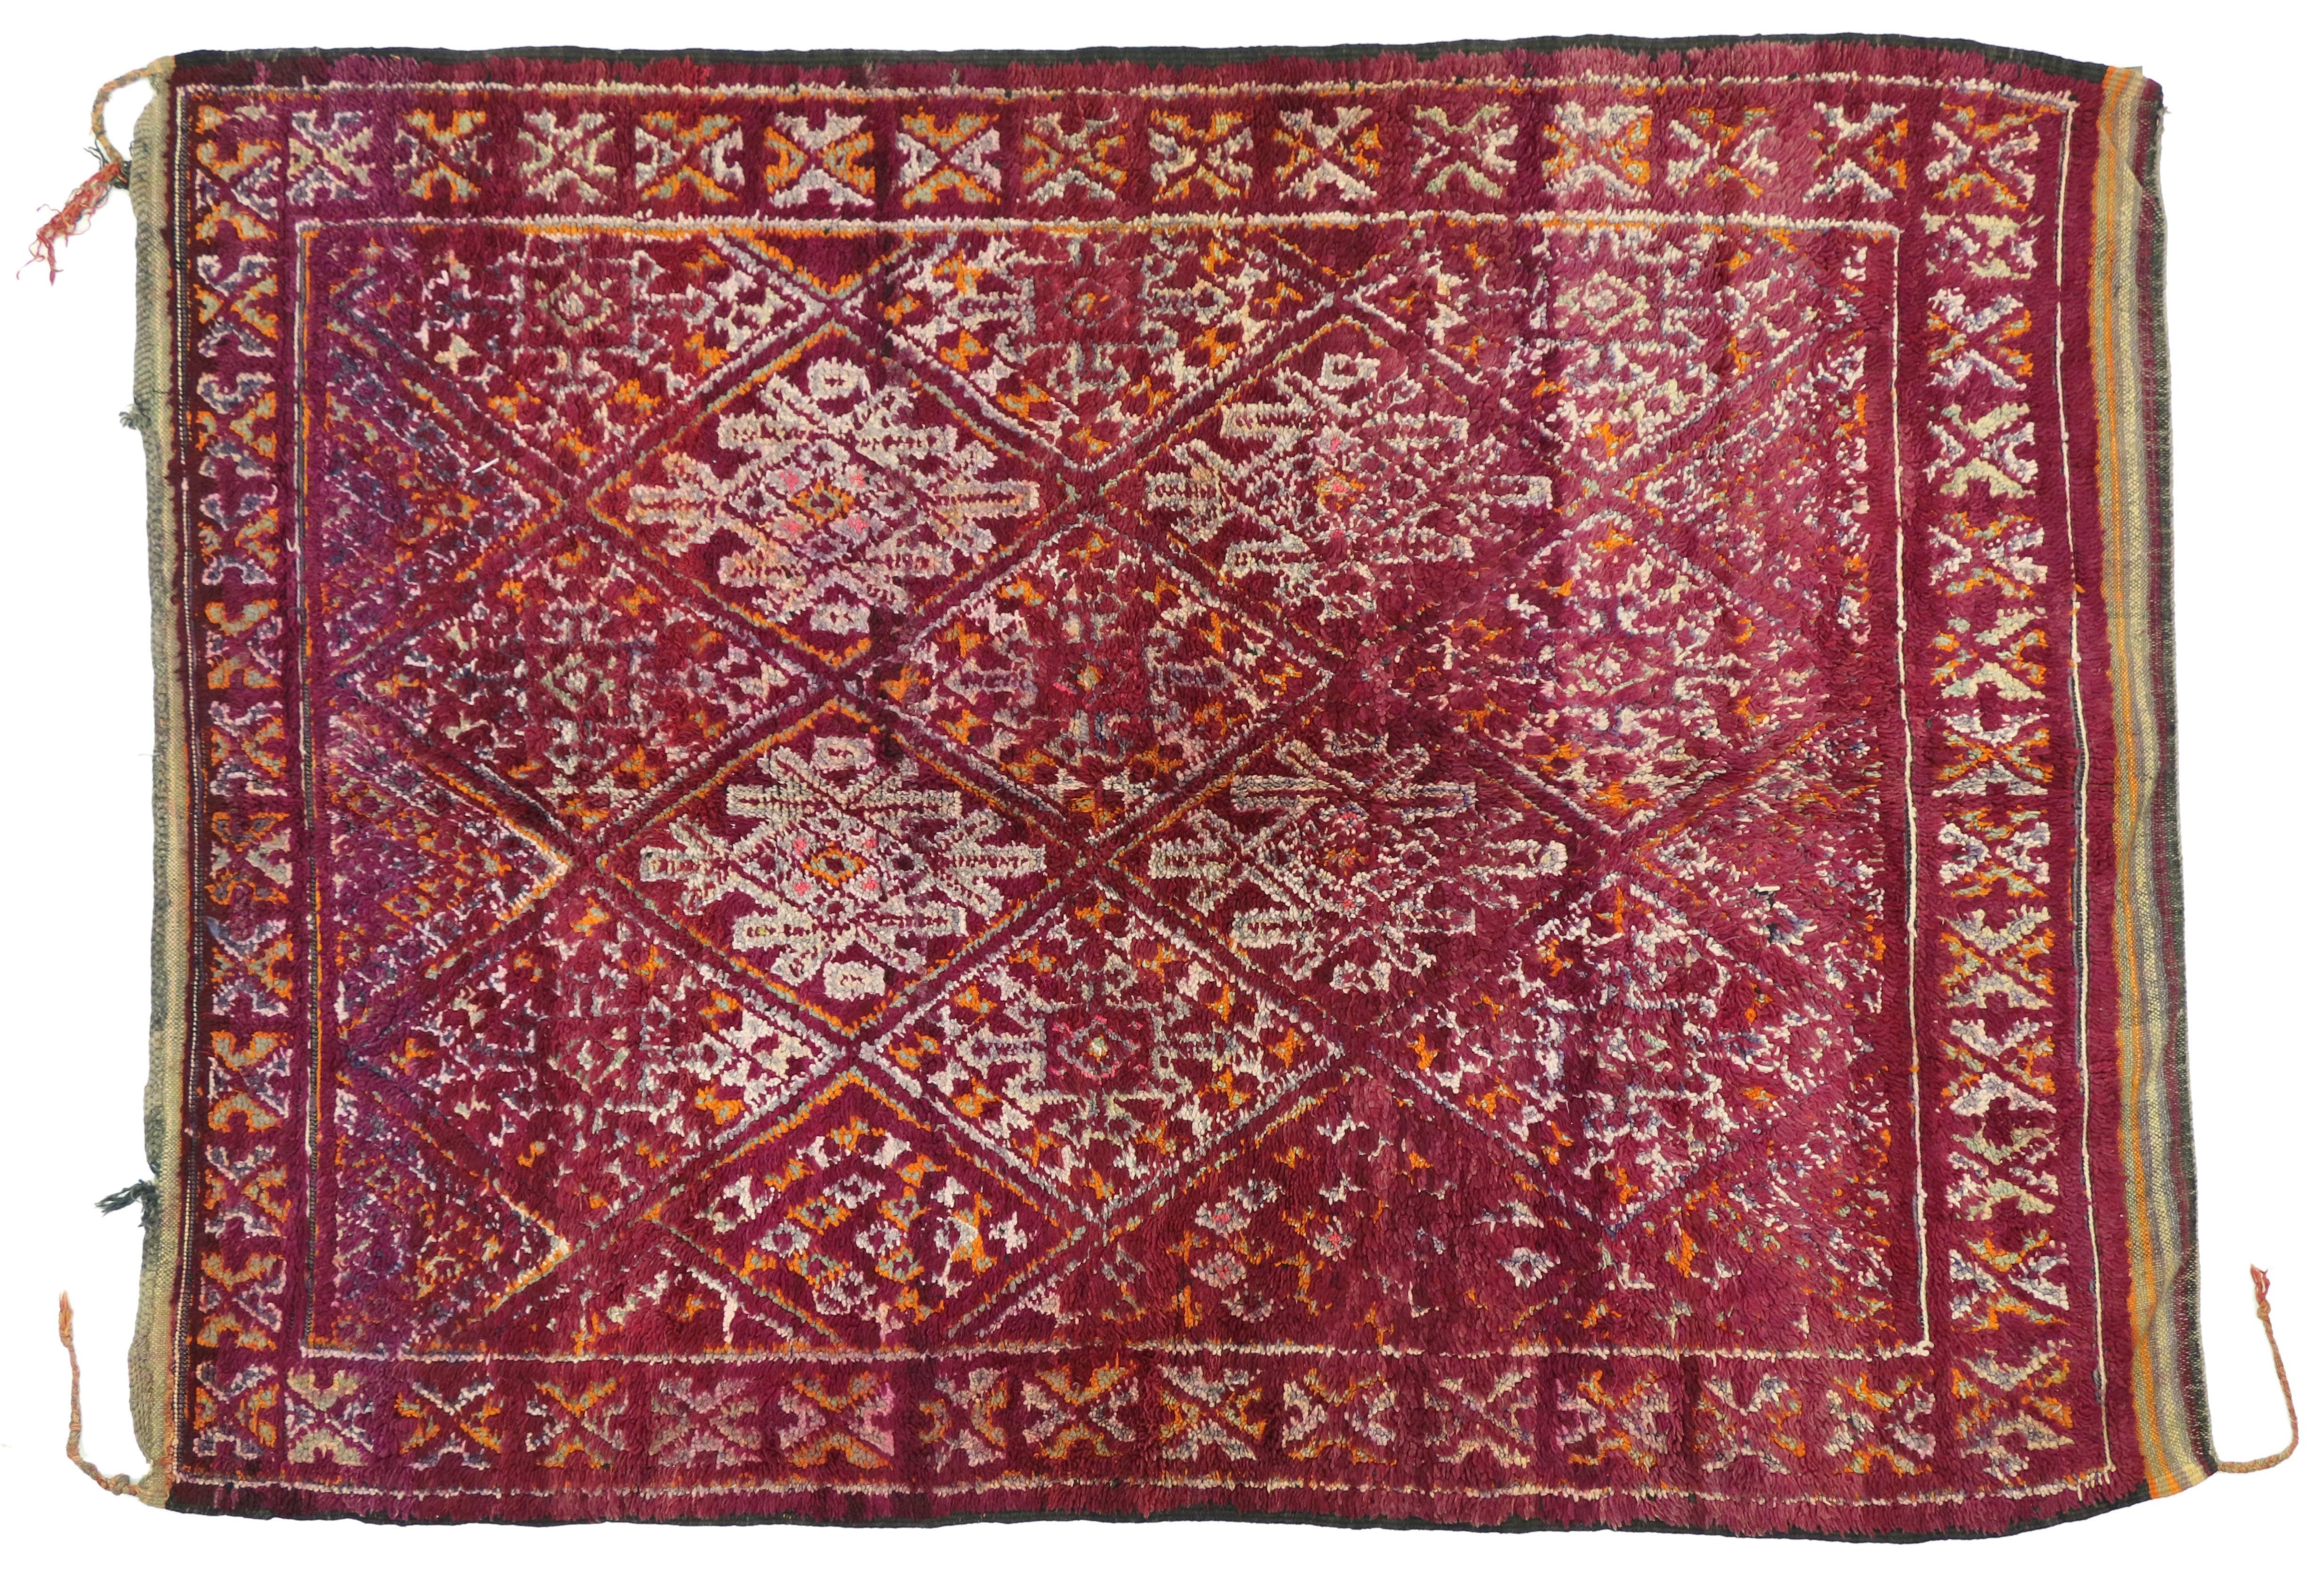 Hand-Knotted Vintage Berber Moroccan Beni M'Guild Rug with Tribal Boho Chic Style